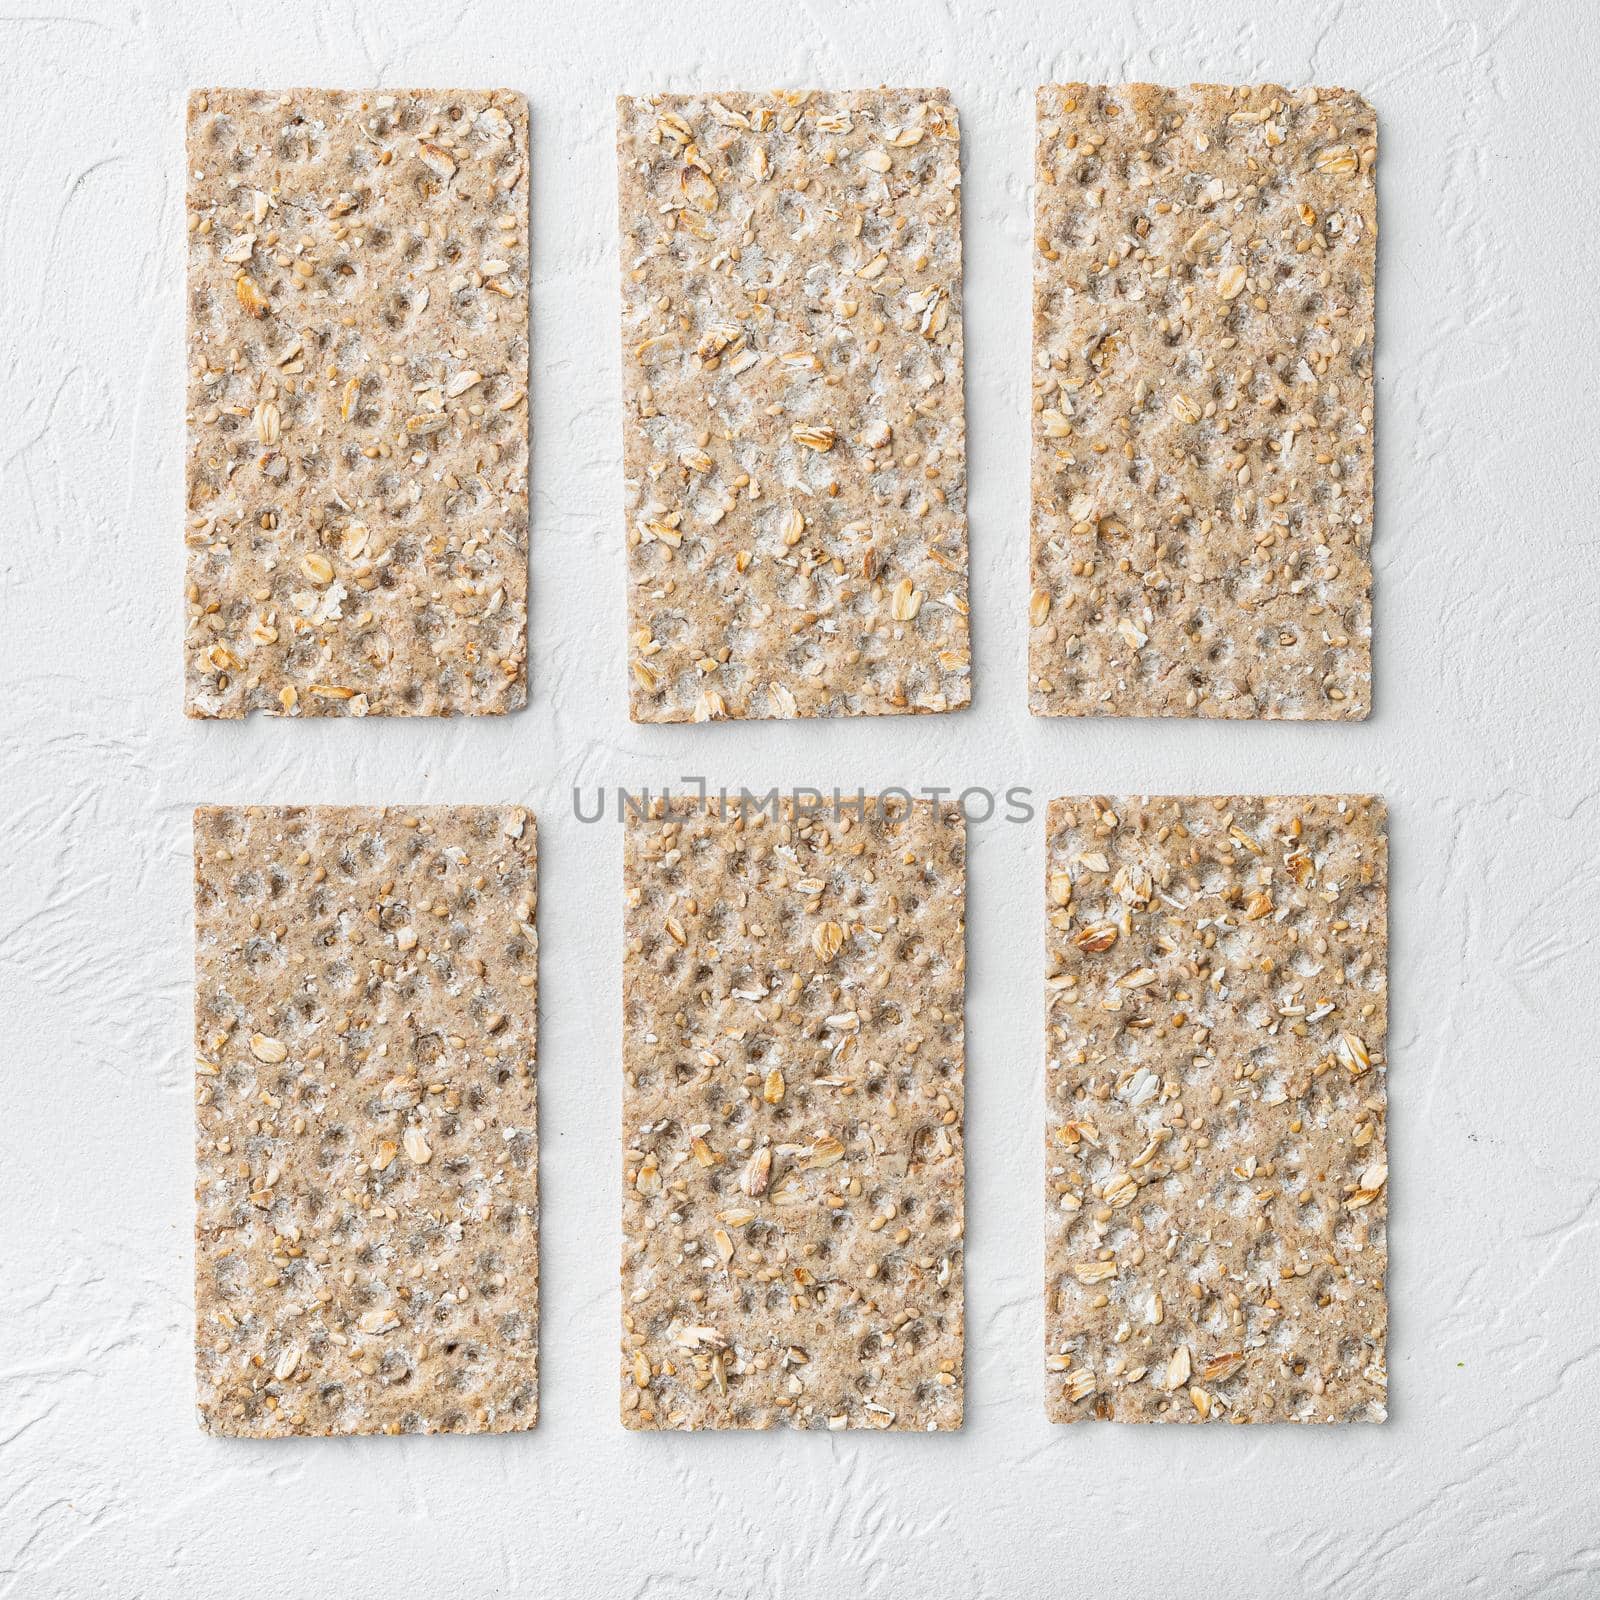 Grain diet light crisp bread set, square format, on white stone table background, top view flat lay, with copy space for text